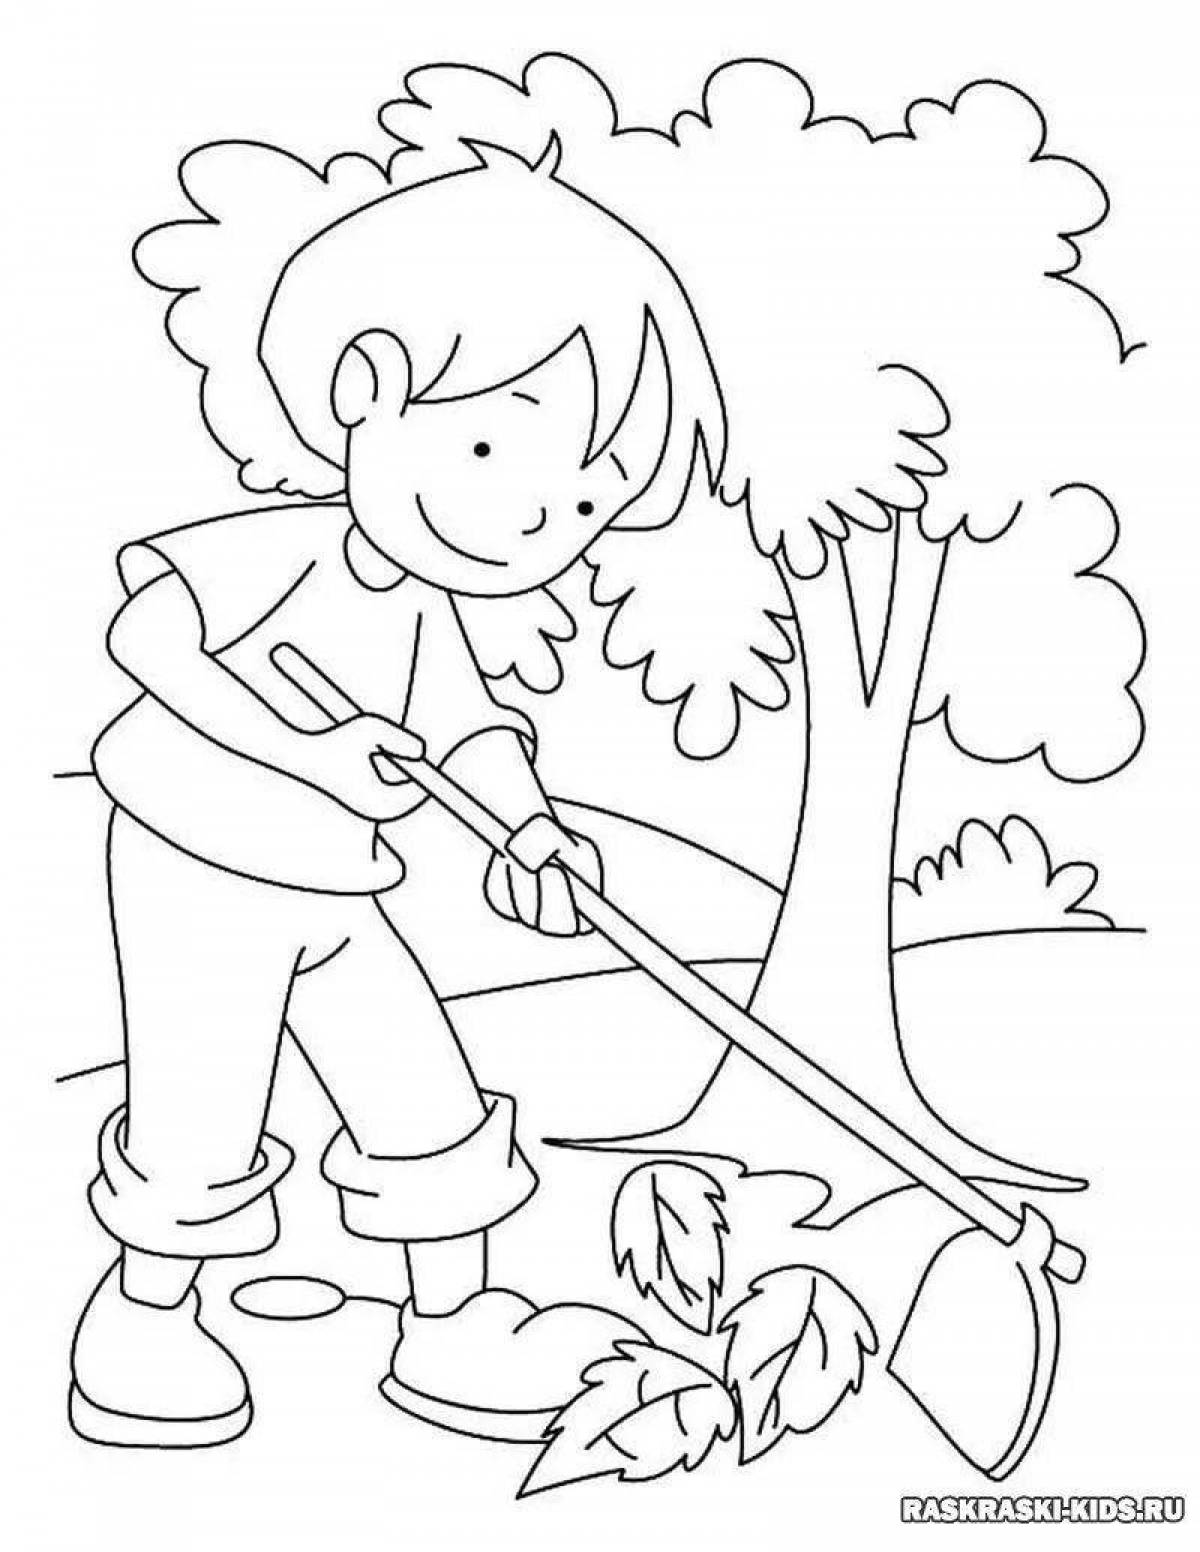 Care for nature colorful coloring page on the theme of ecology